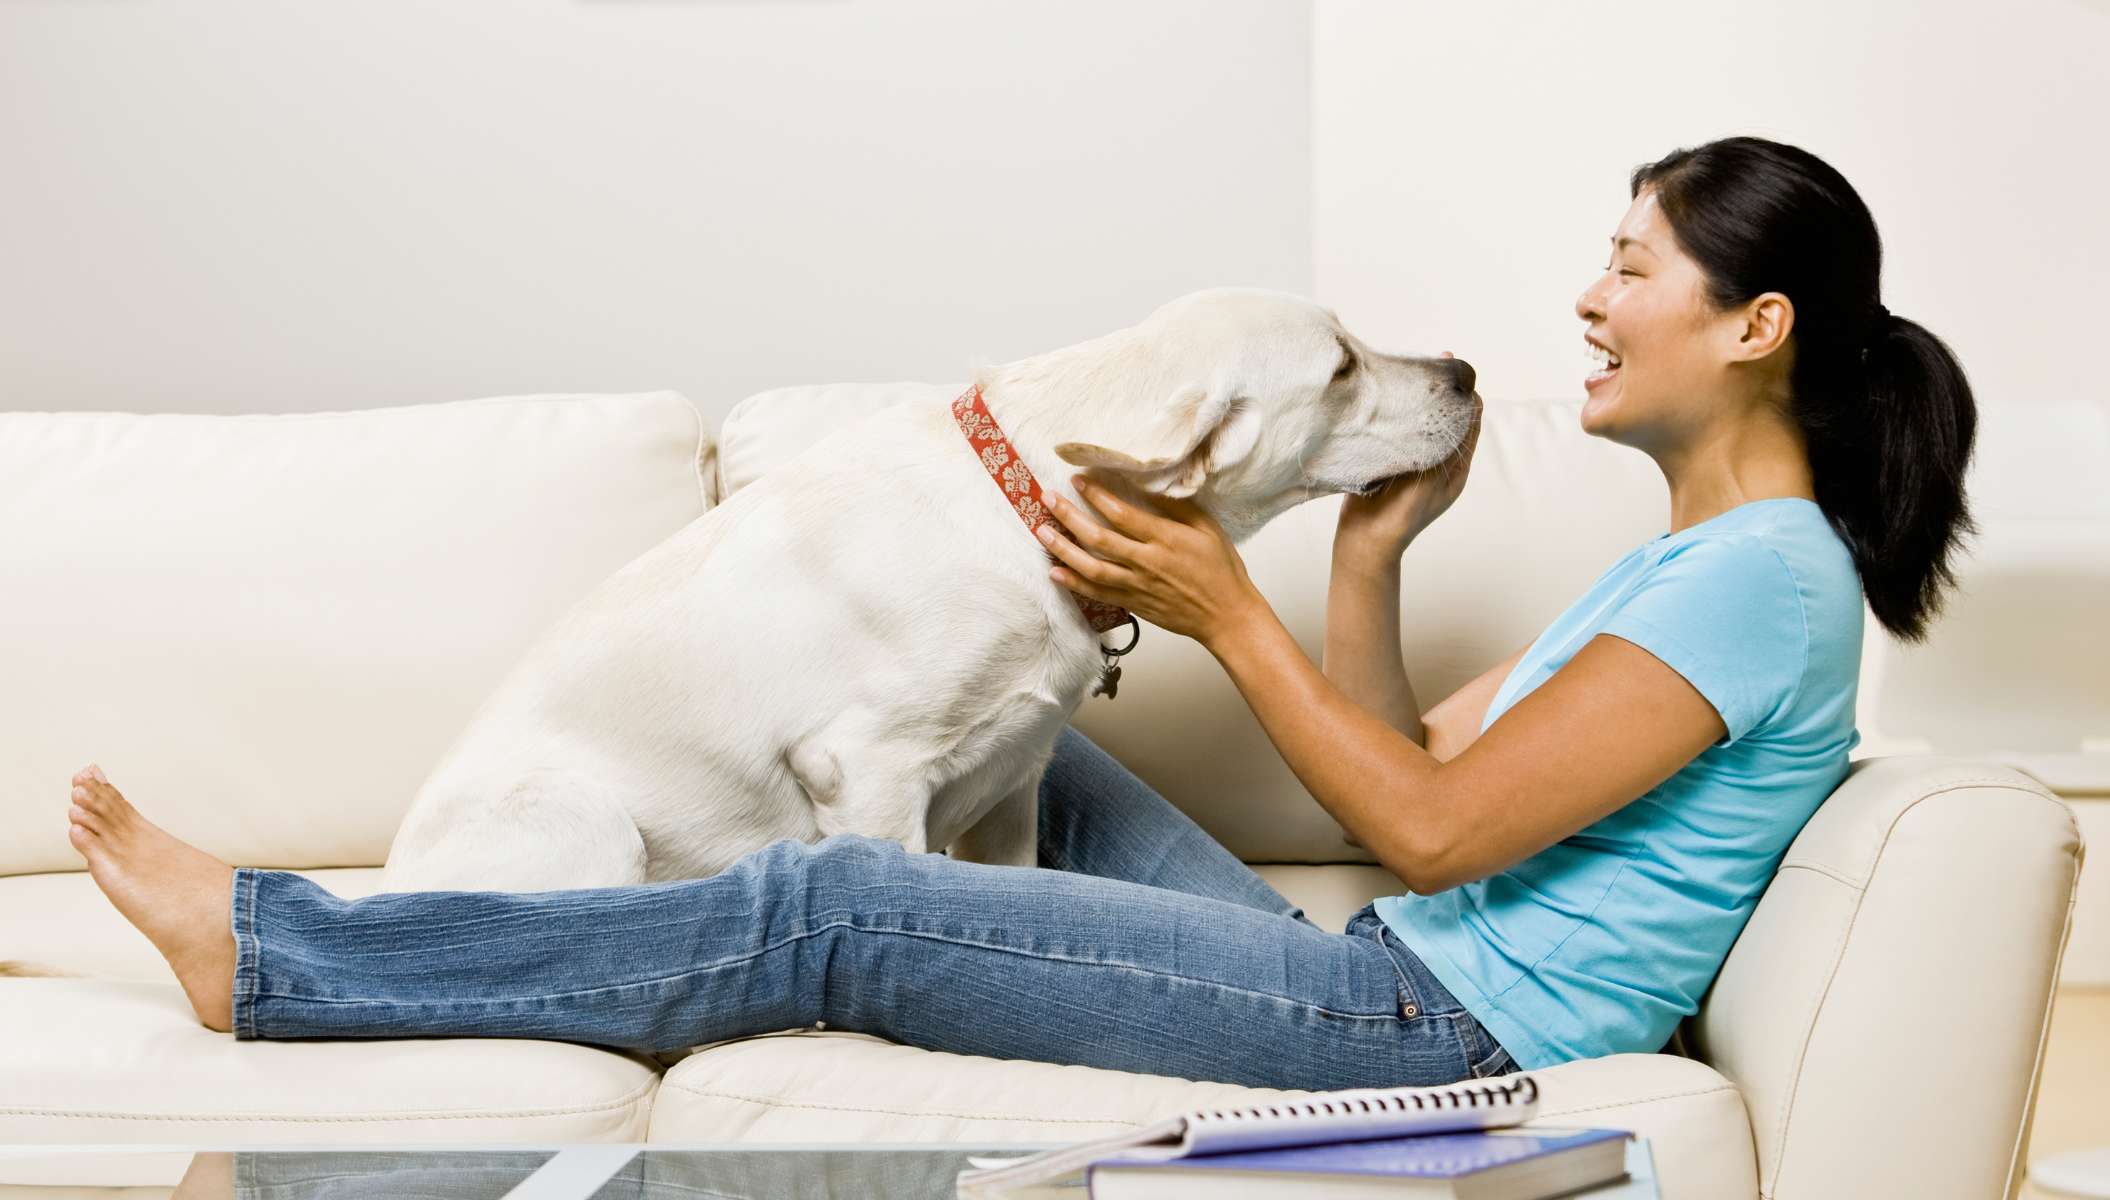 Woman and Pet Enjoy Clean Air from AC Unit at Home